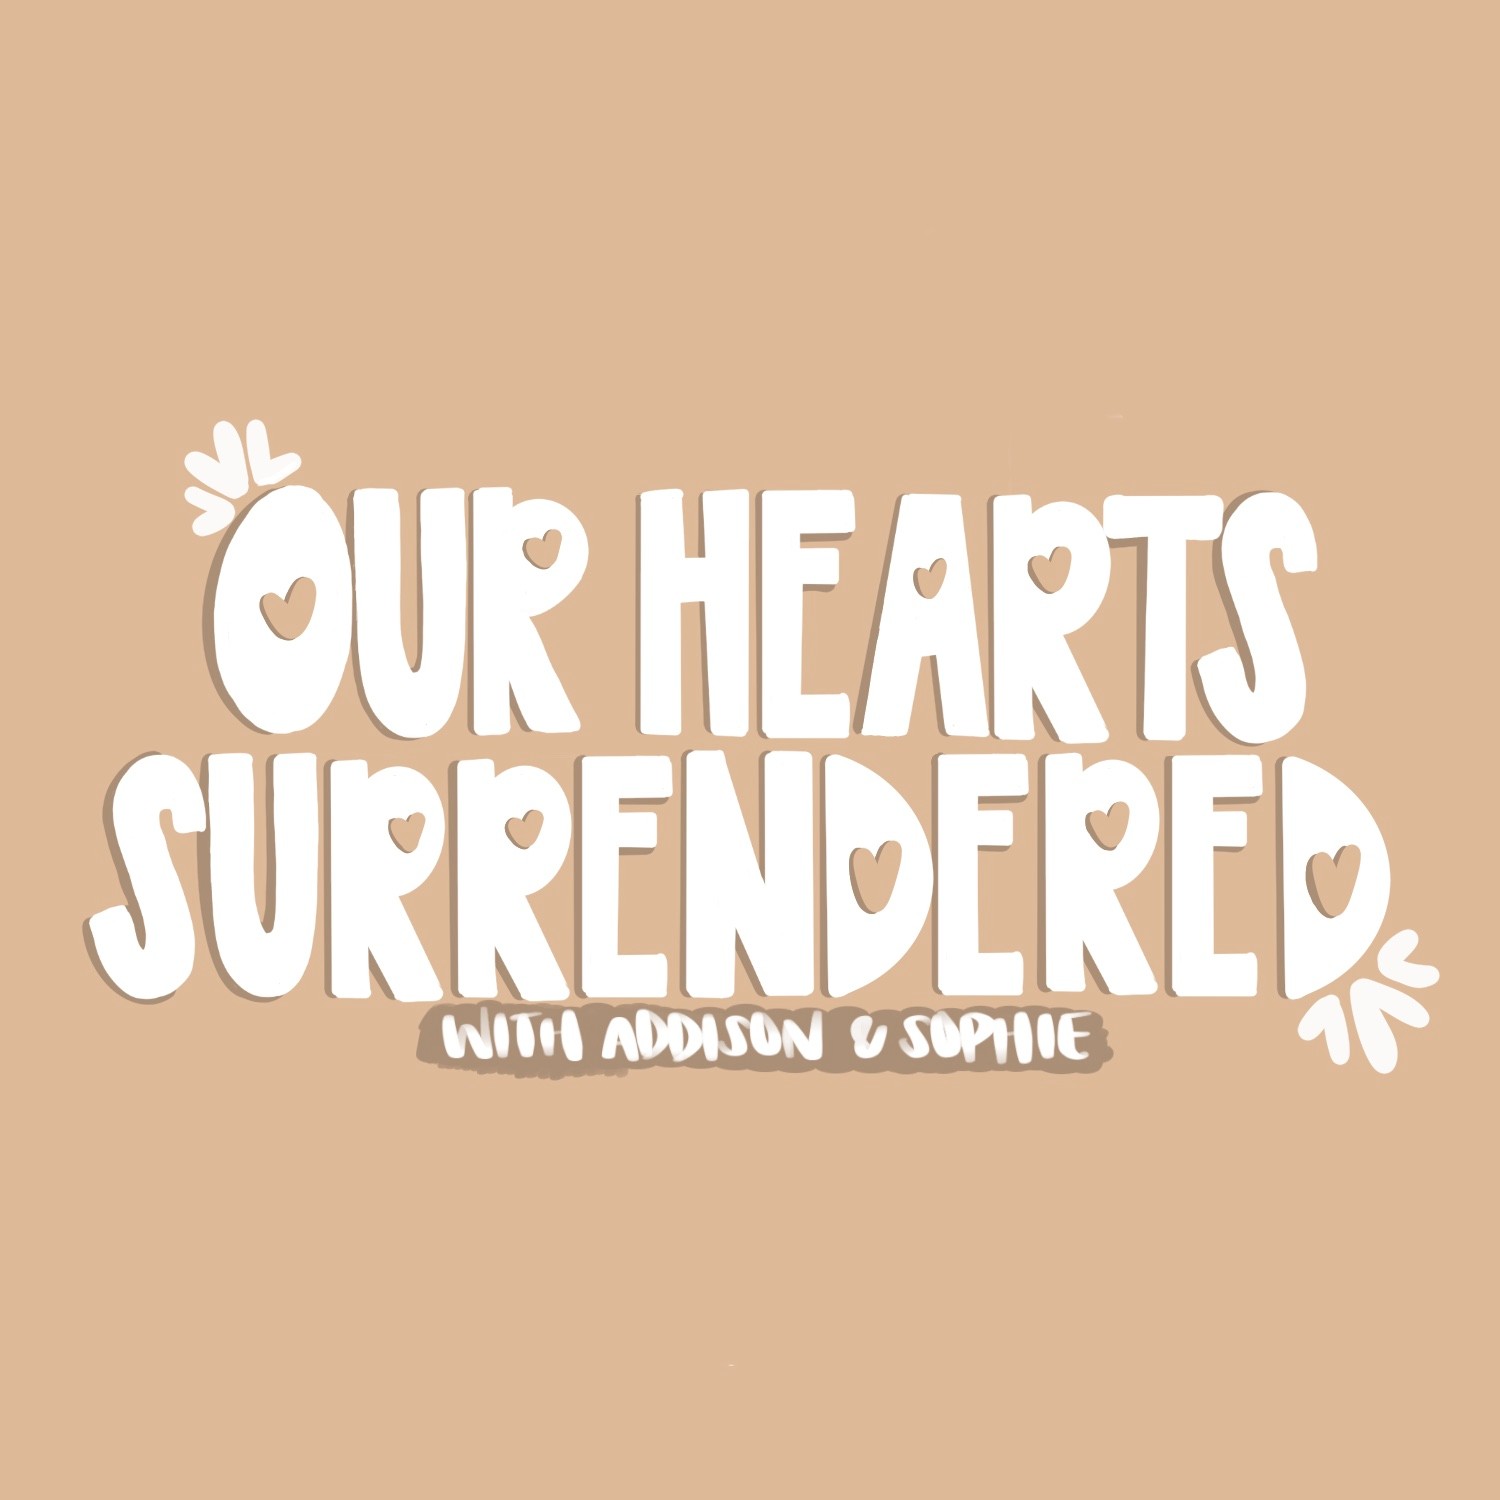 Our Hearts Surrendered